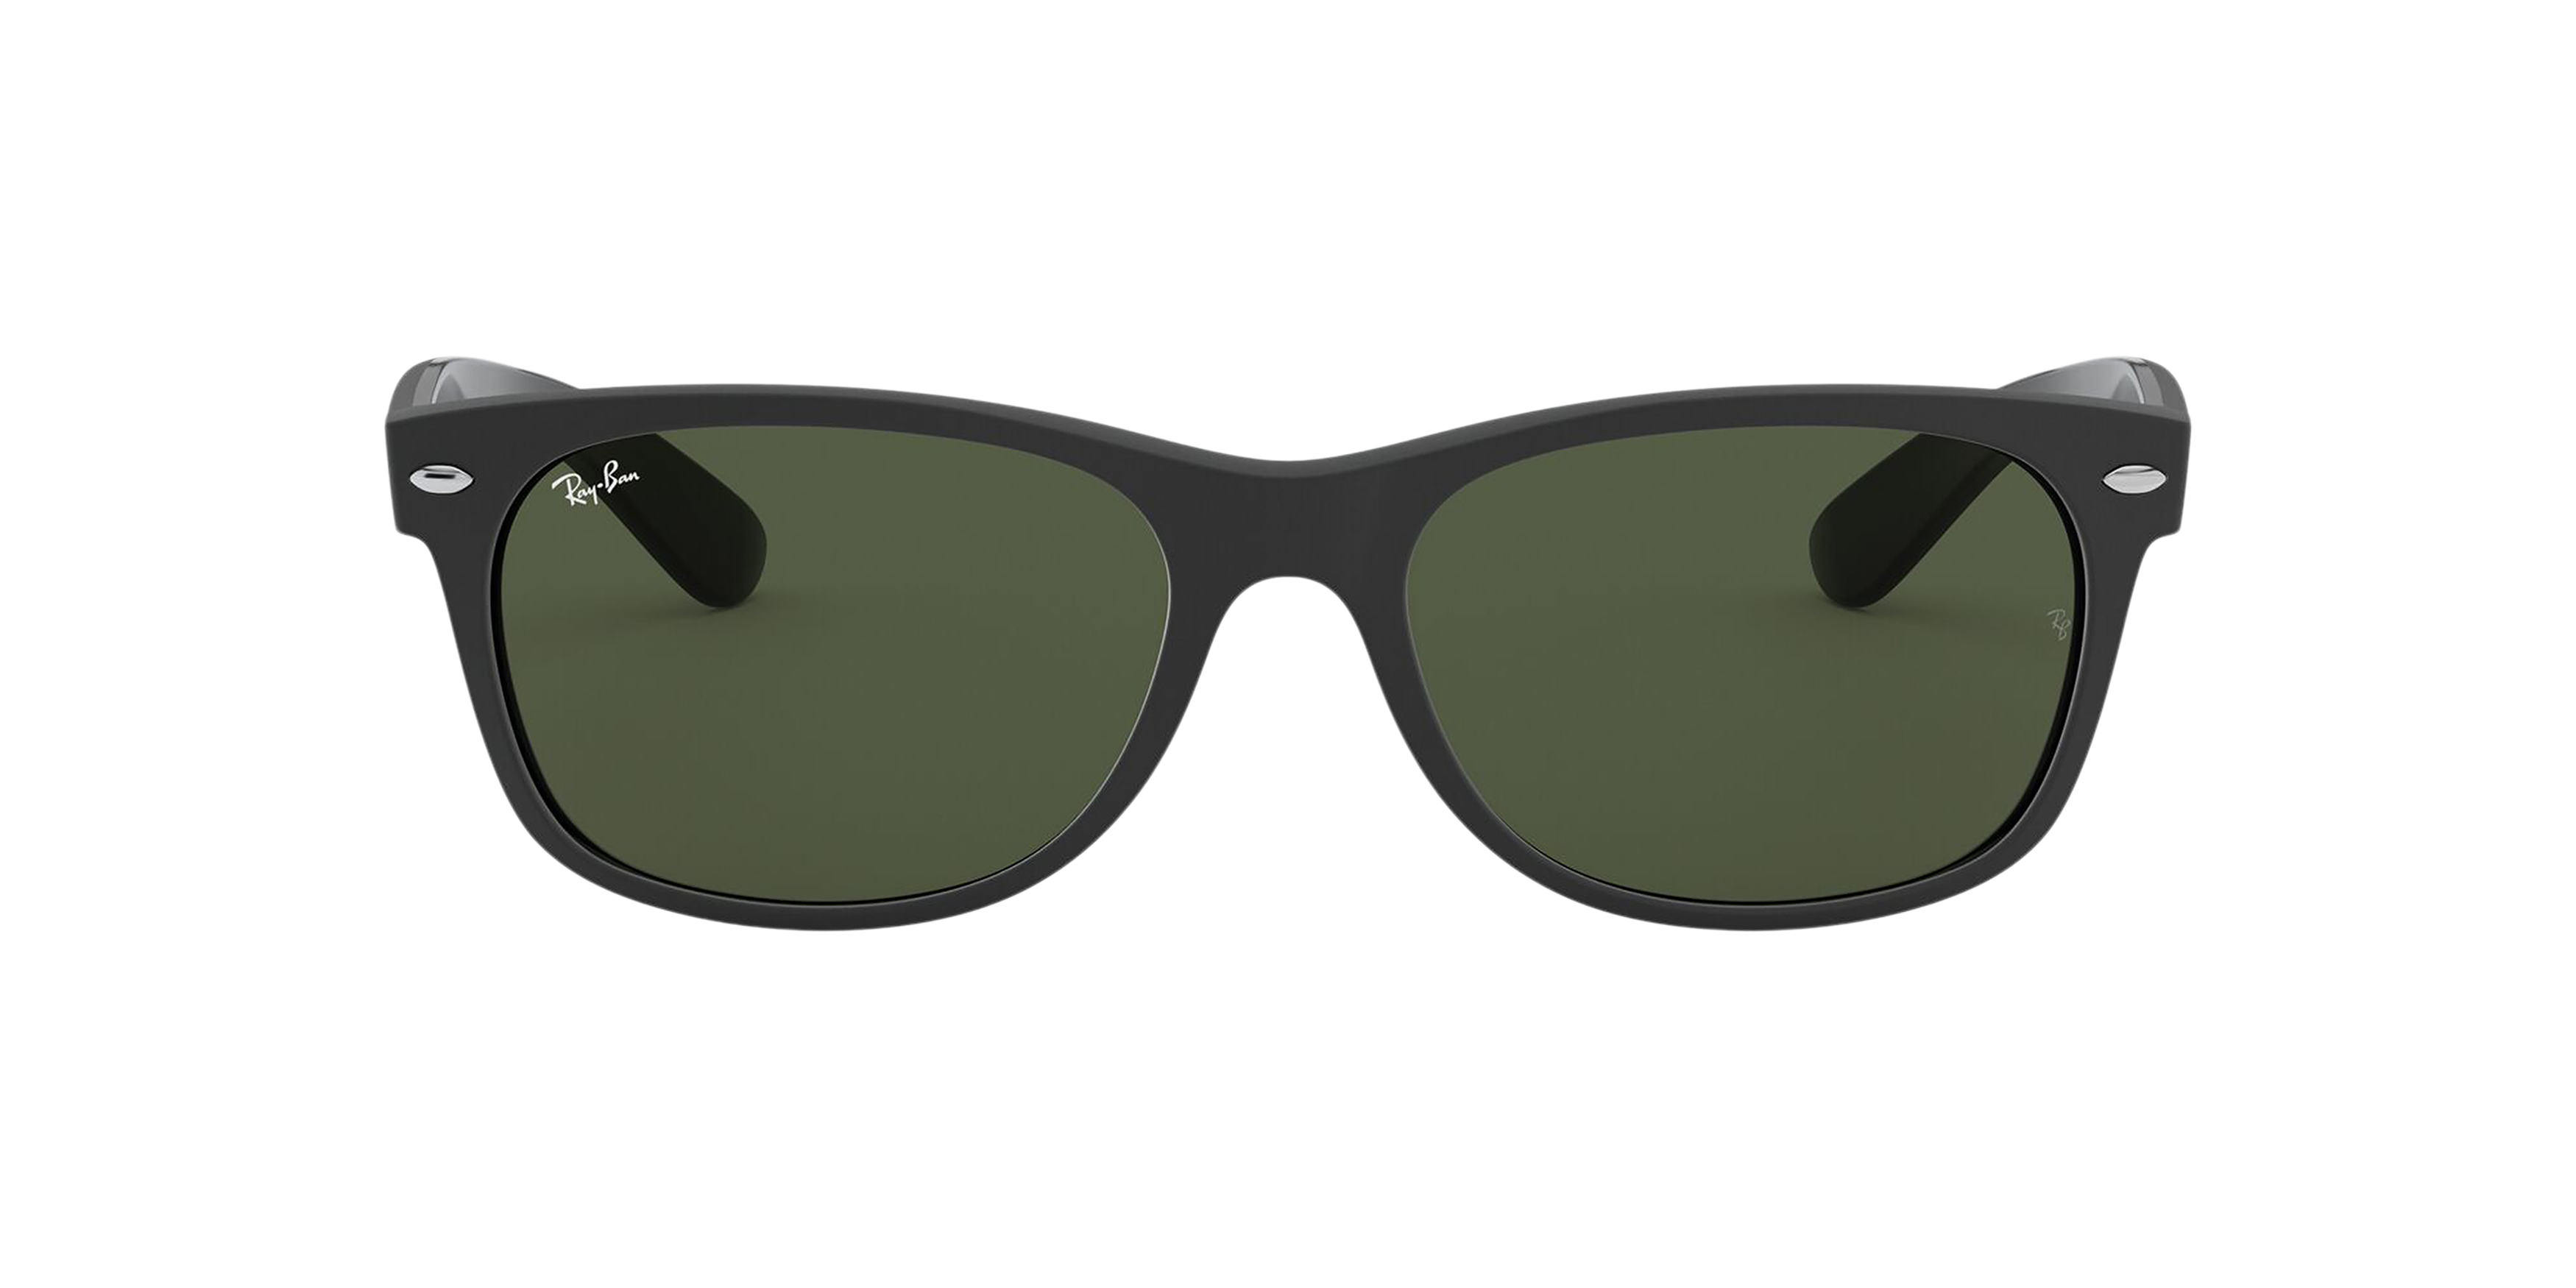 [products.image.front] Ray-Ban New Wayfarer Color Mix RB2132 646231